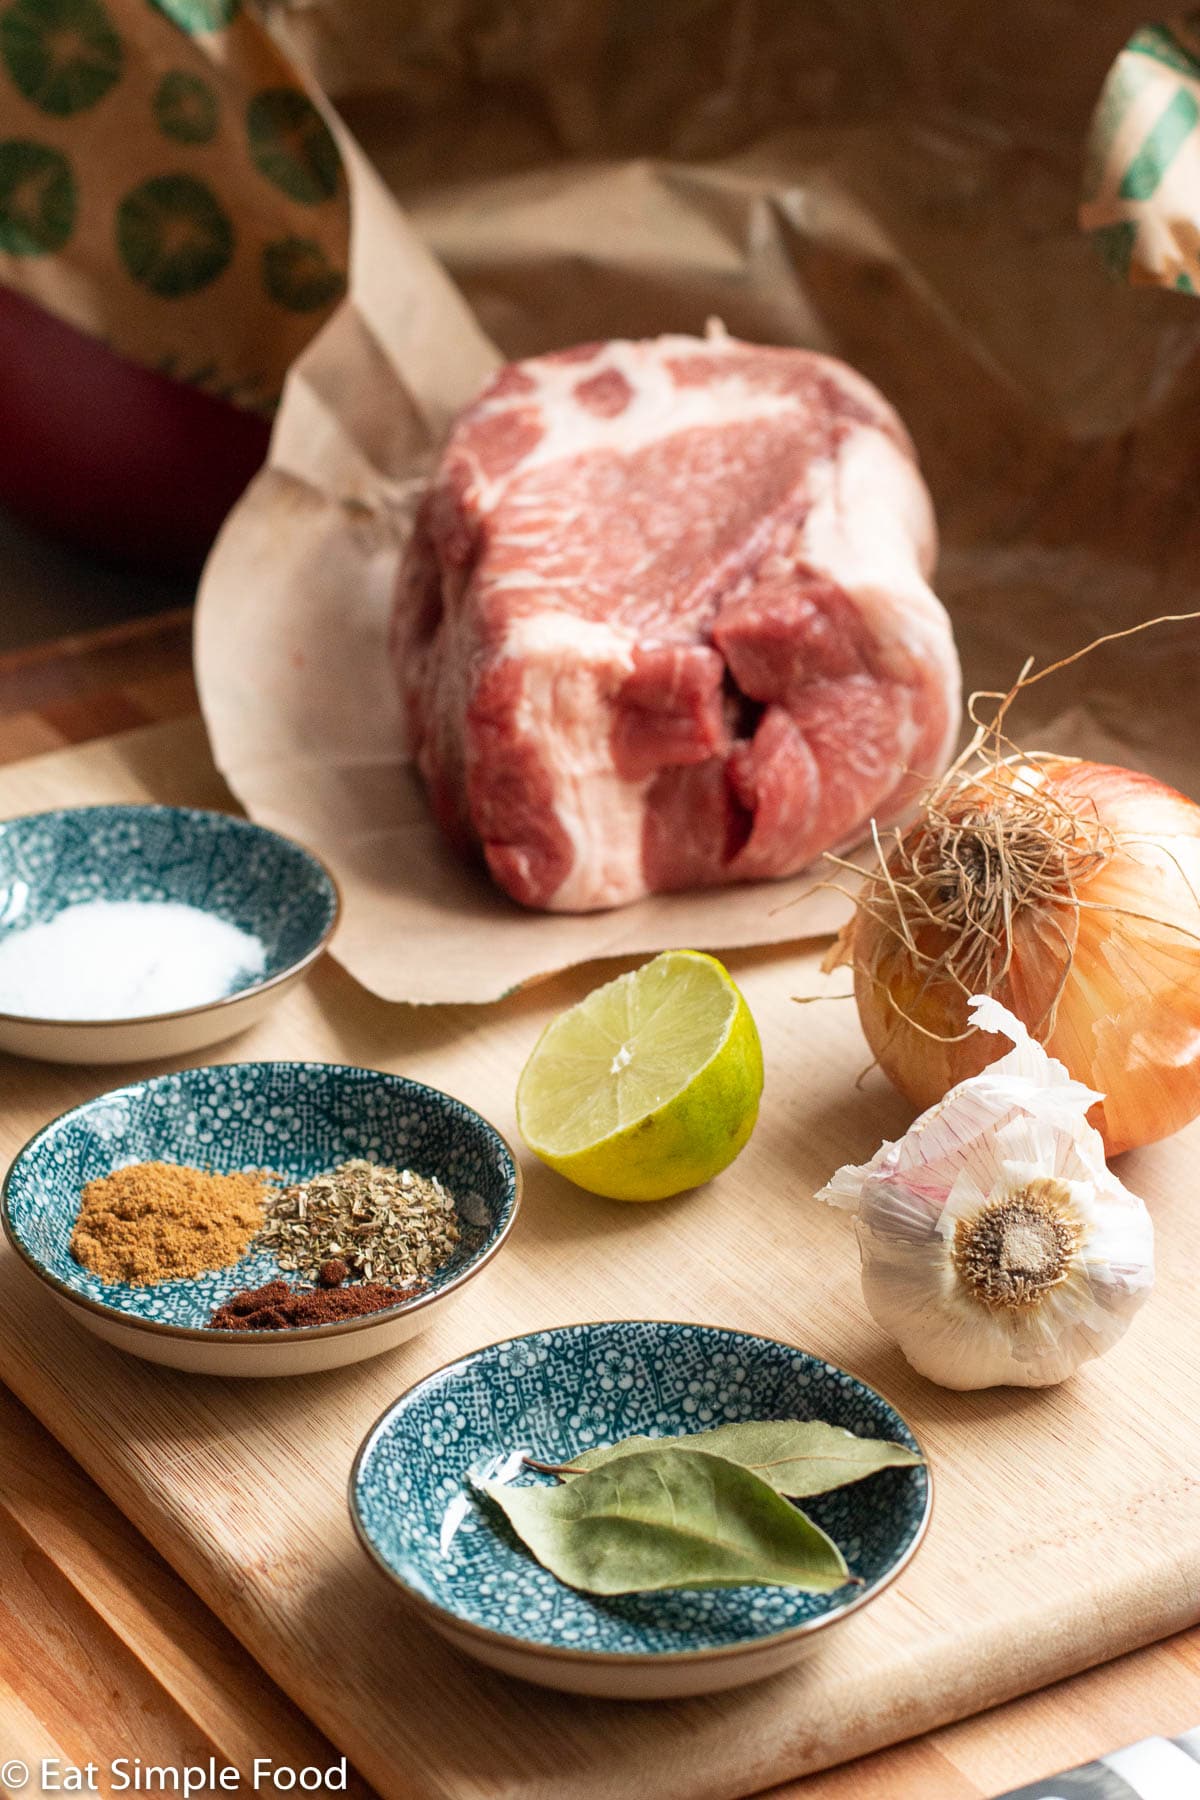 Raw ingredients on a wood cutting board: chunk of boneless pork shoulder, lime half, 2 bay leaves, 4 colorful spices, garlic knob, and whole onion.